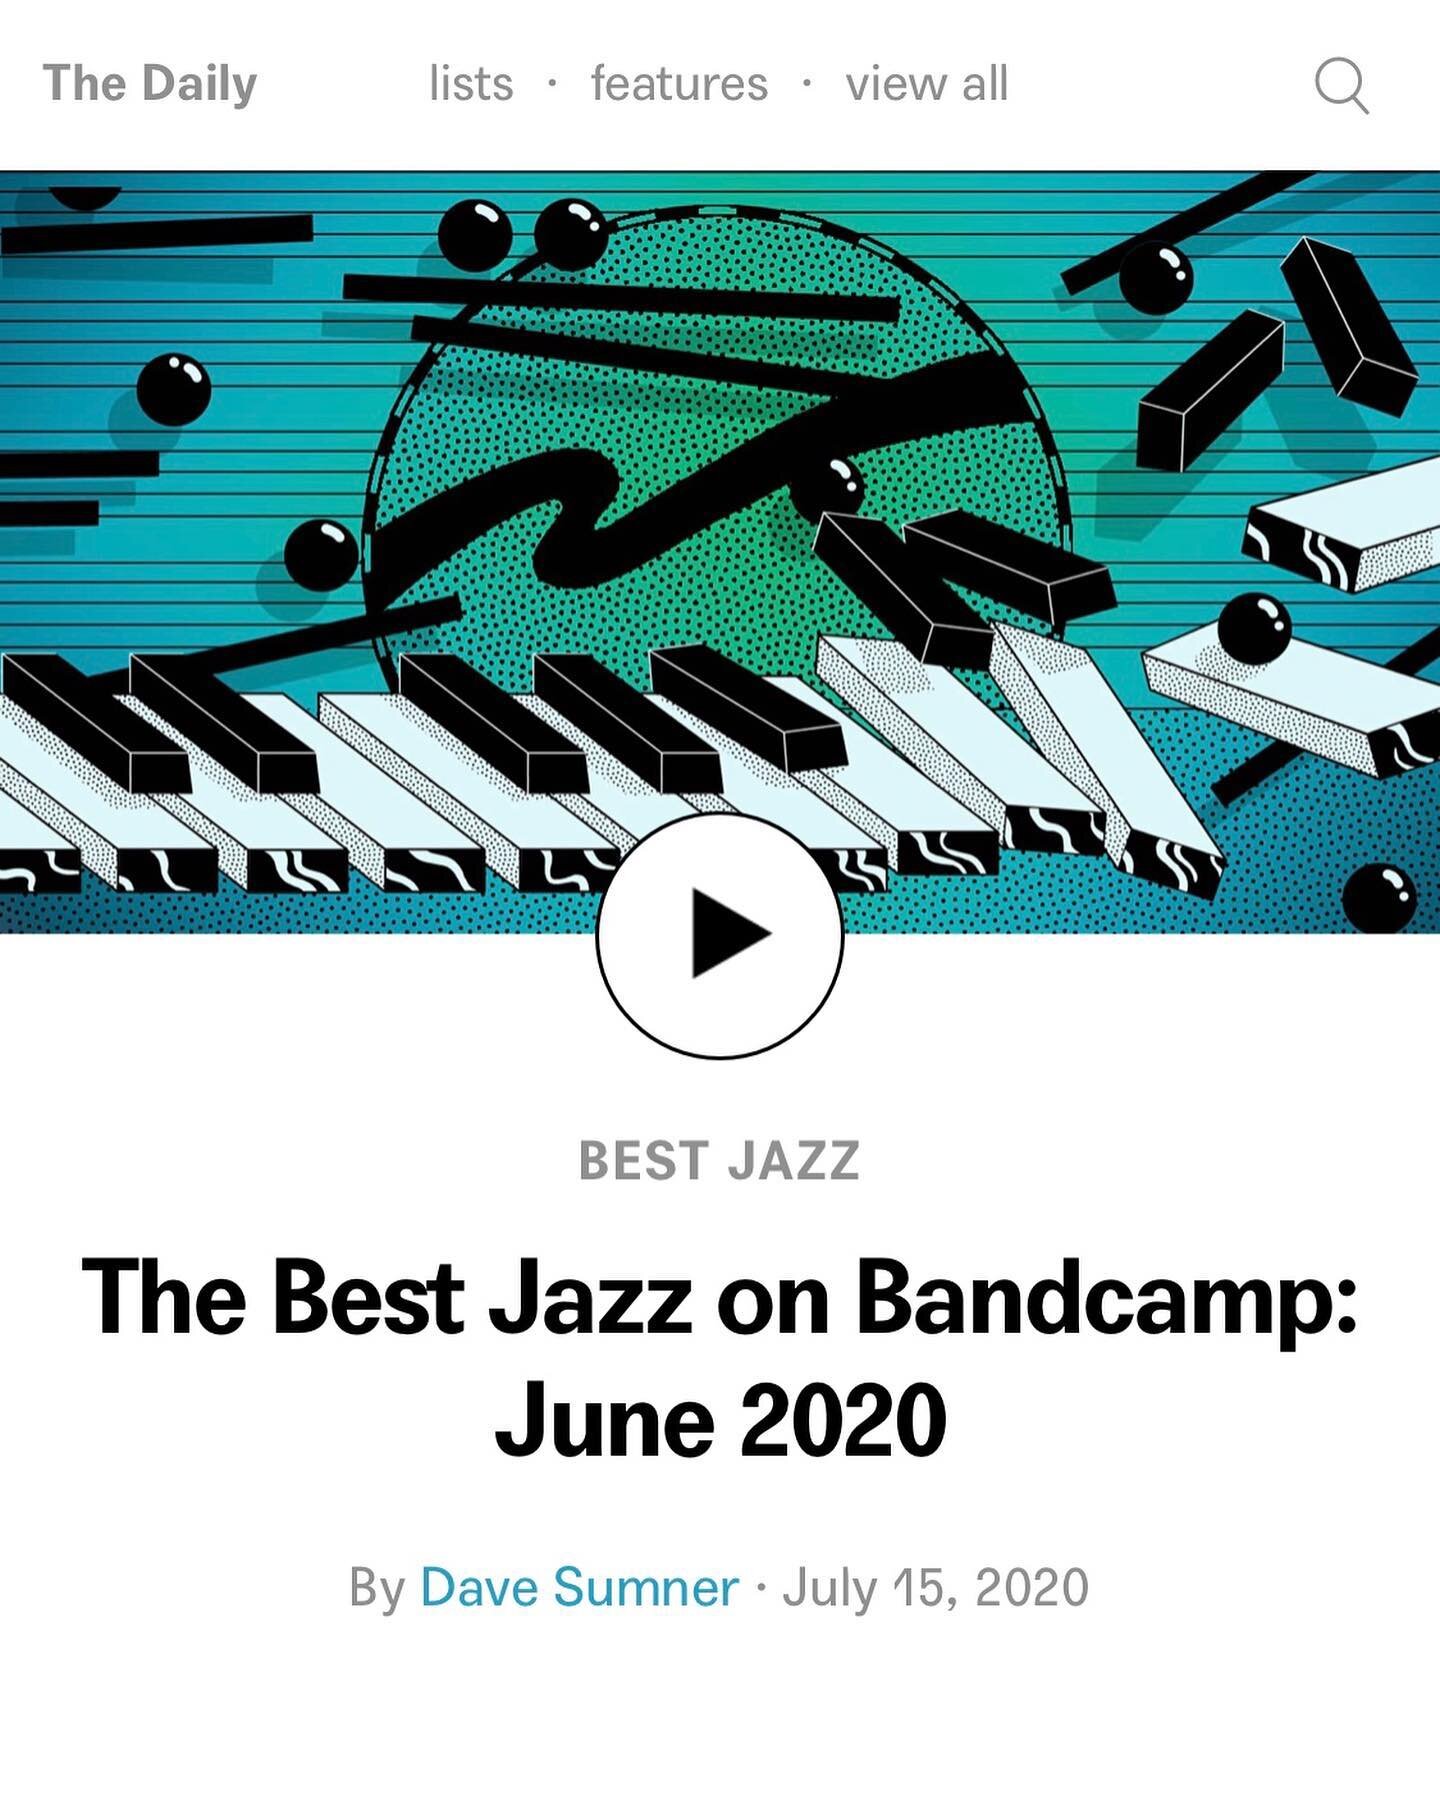 𝙏𝙝𝙚 𝙎𝙝𝙖𝙙𝙤𝙬𝙨 𝙖𝙣𝙙 𝙏𝙝𝙚 𝙇𝙞𝙜𝙝𝙩 - Best Jazz on @bandcamp June 2020. Thanks to Dave Sumner for the shoutout!